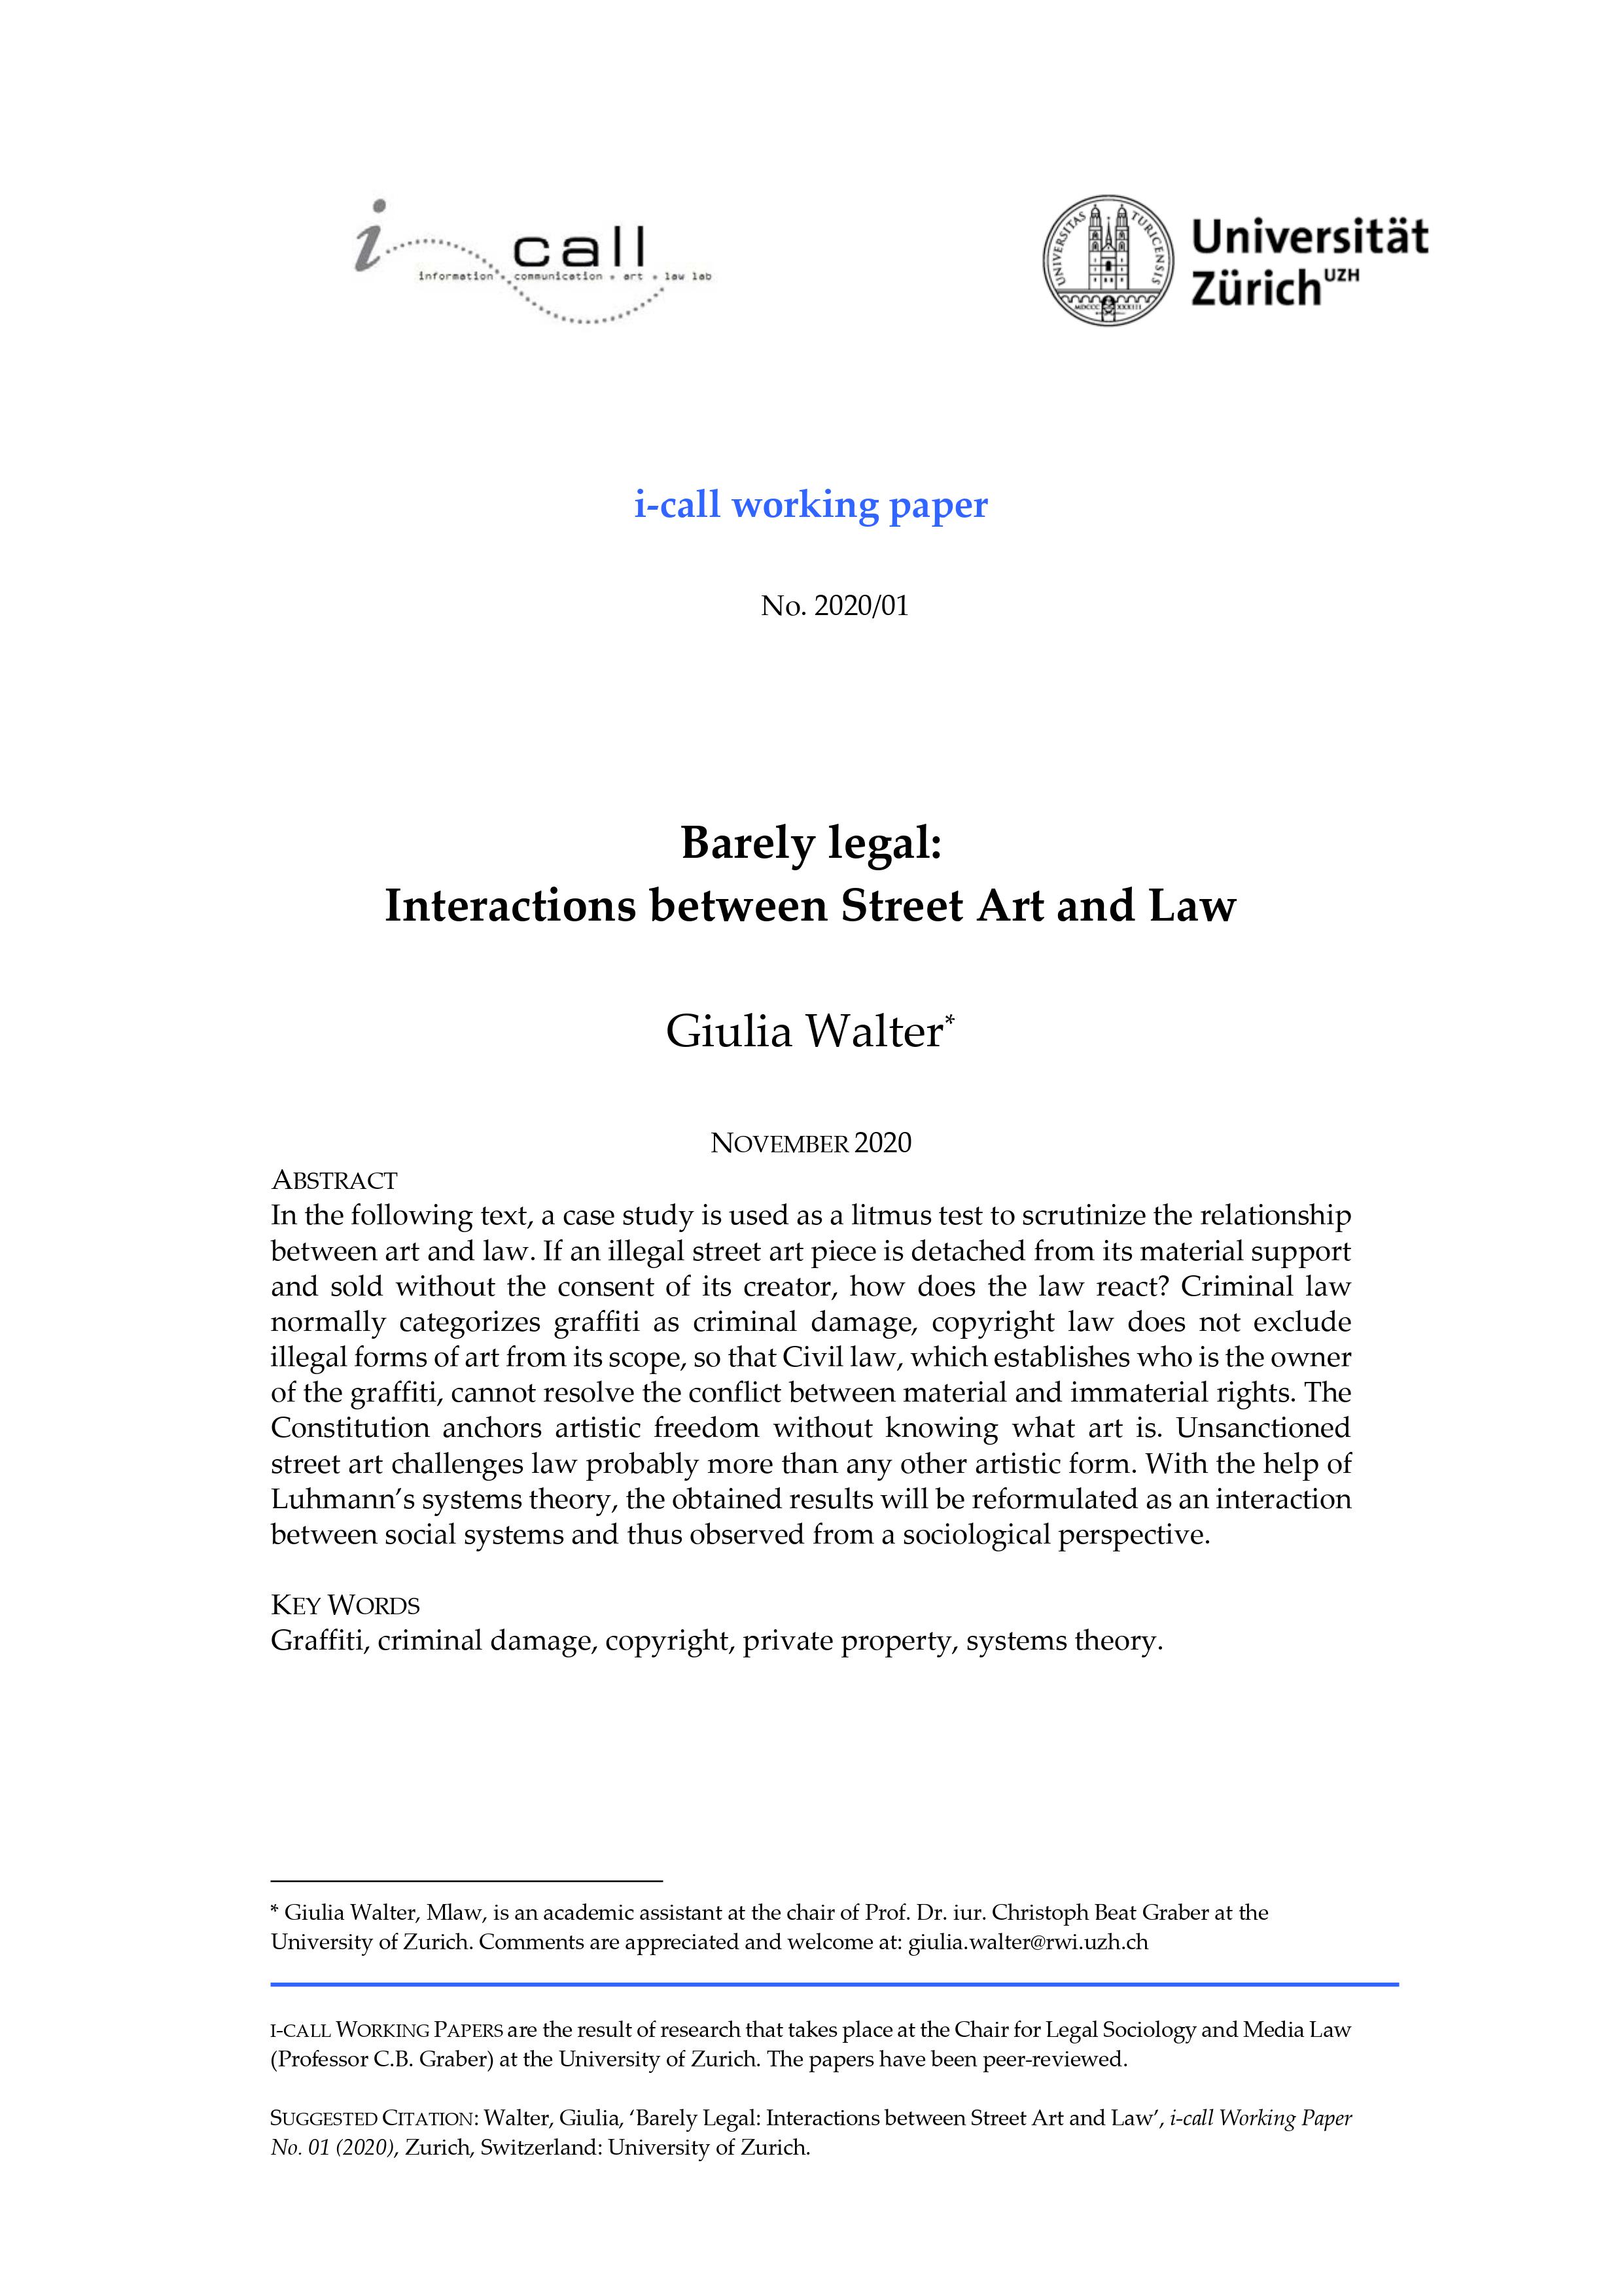 Giulia Walter_Barely legal_Interactions between Street Art and Law_2020_01